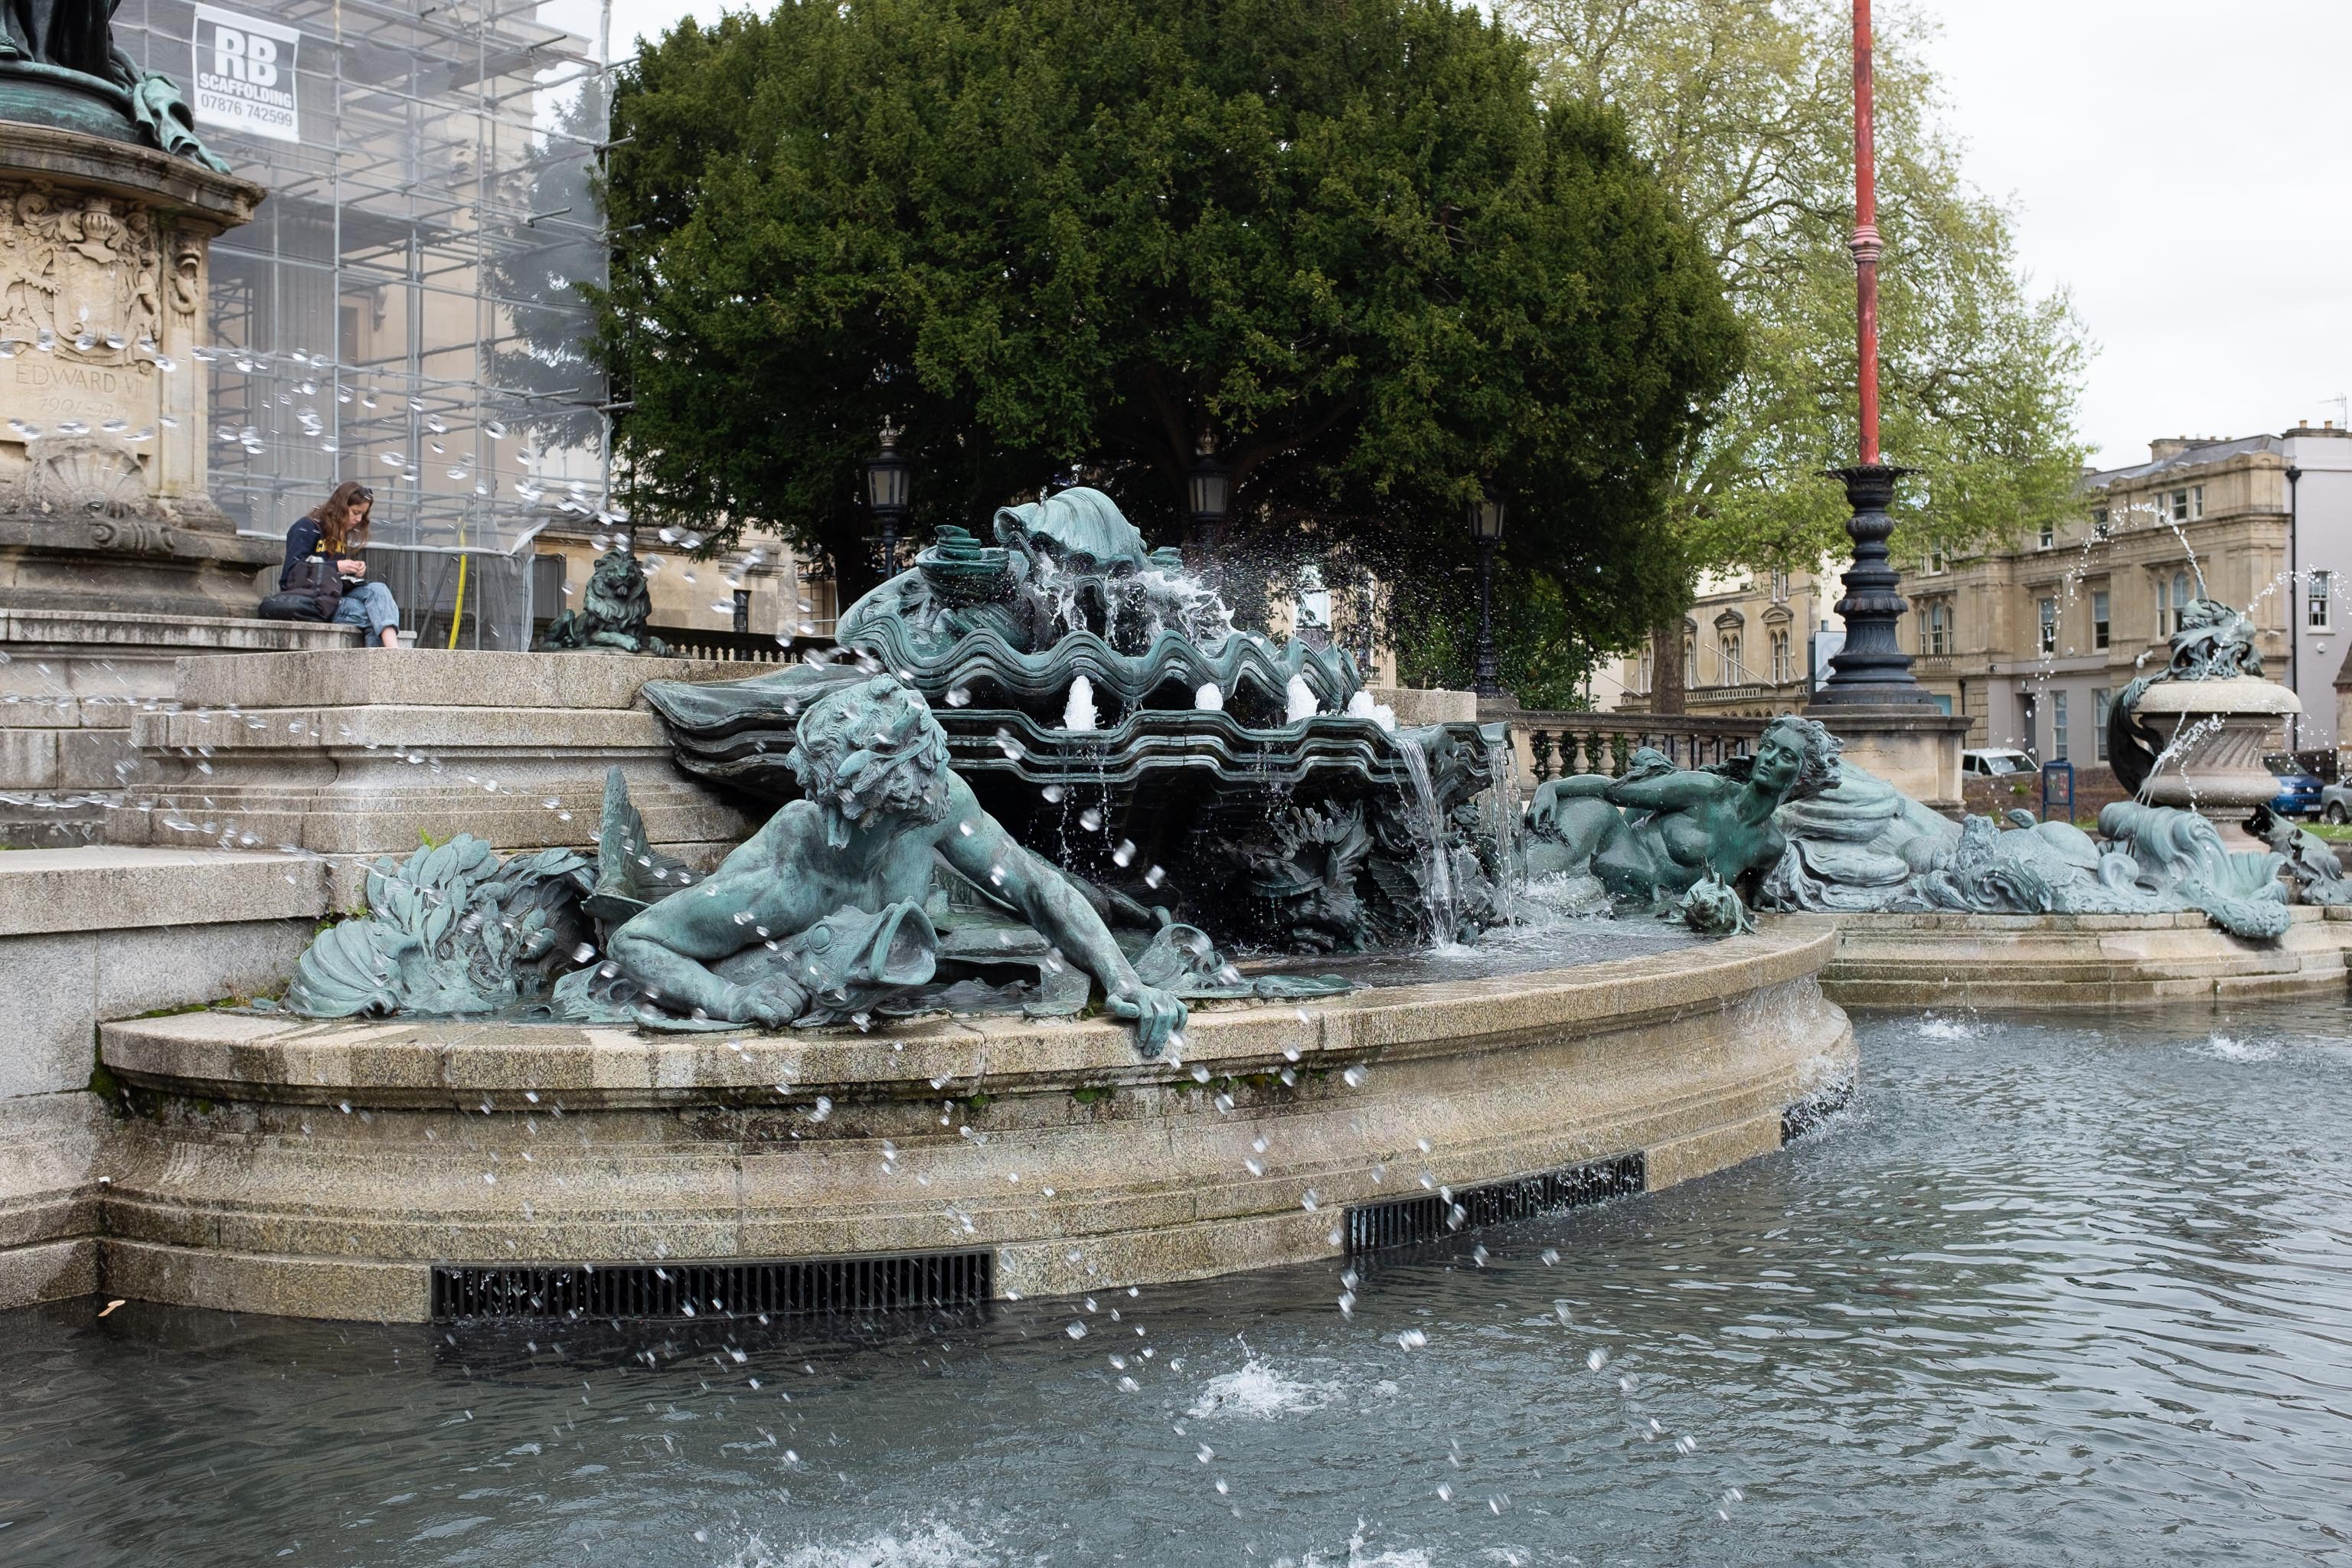 Victoria Rooms Fountains
From the listing:


  By Edwin Rickards and Henry Poole. Pennant ashlar, limestone balustrades, cast-iron railings and lamps, bronze statues. Raise...